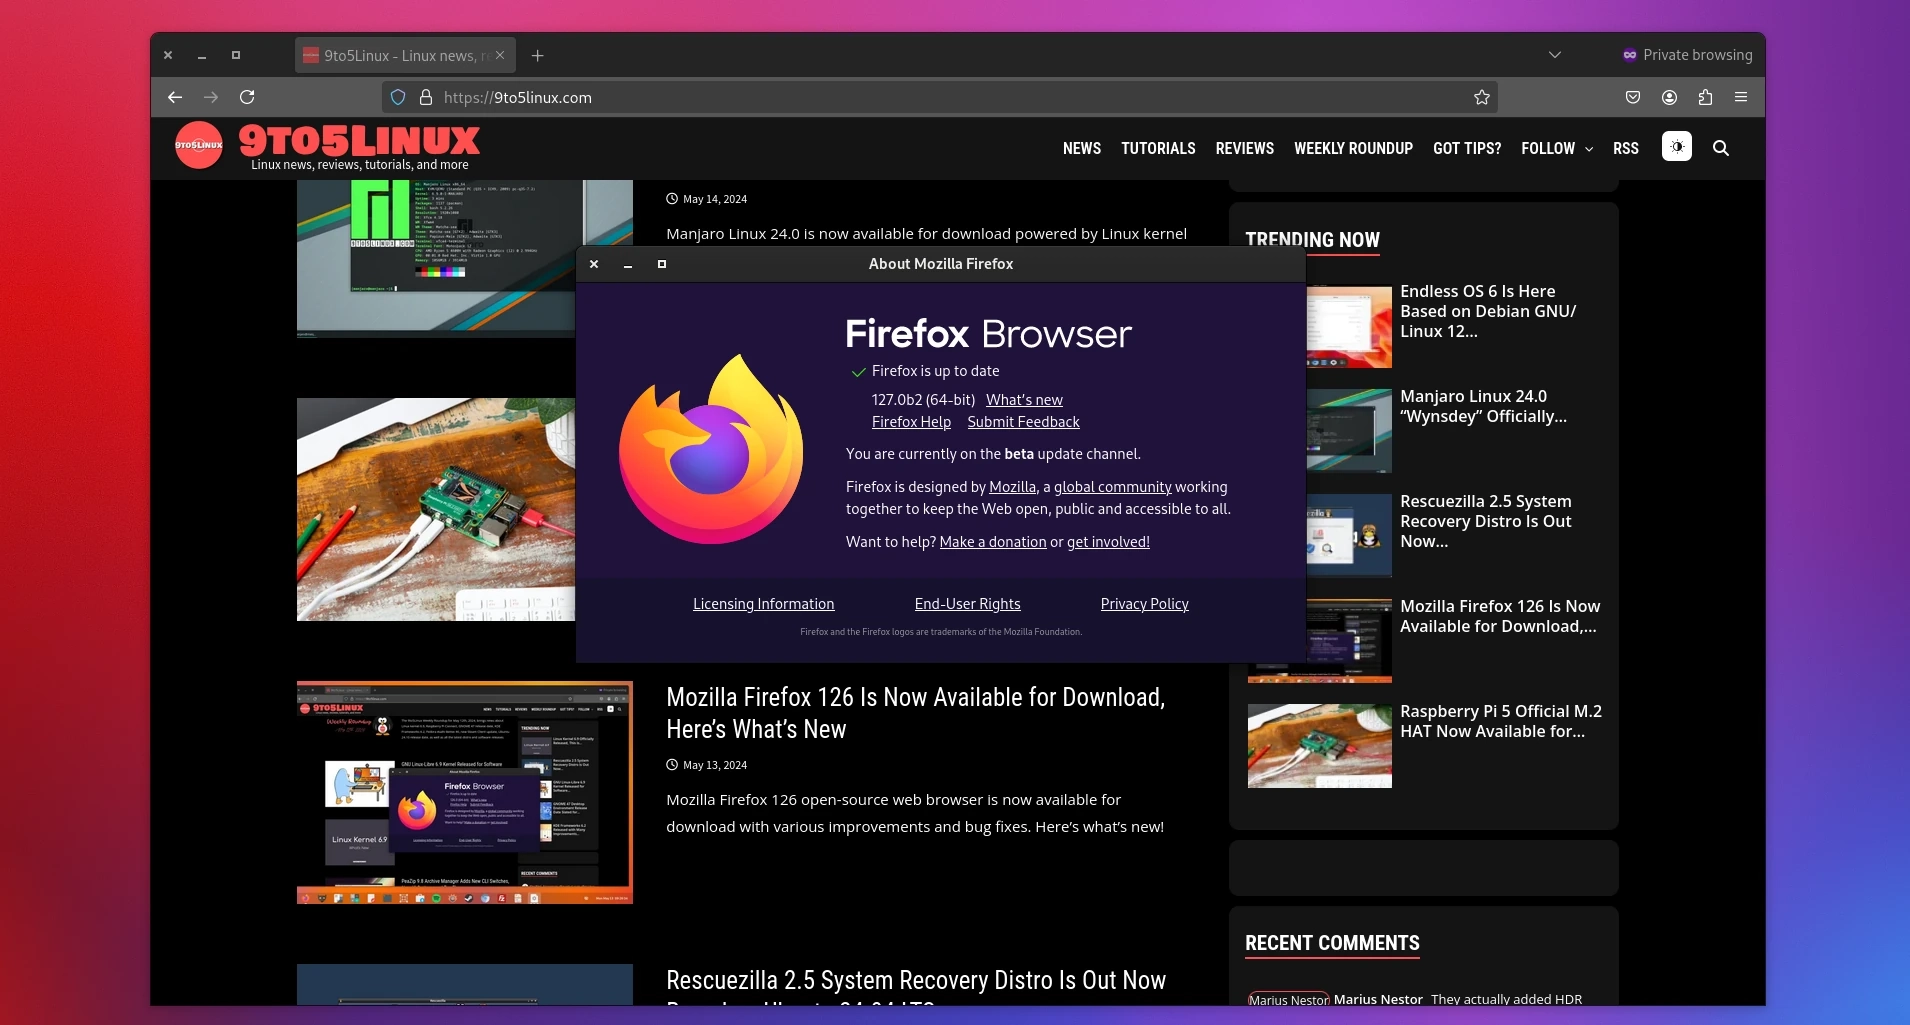 Beta Testing Begins for Firefox 127: Highlighting Updated Screenshot Tool and Additional Changes